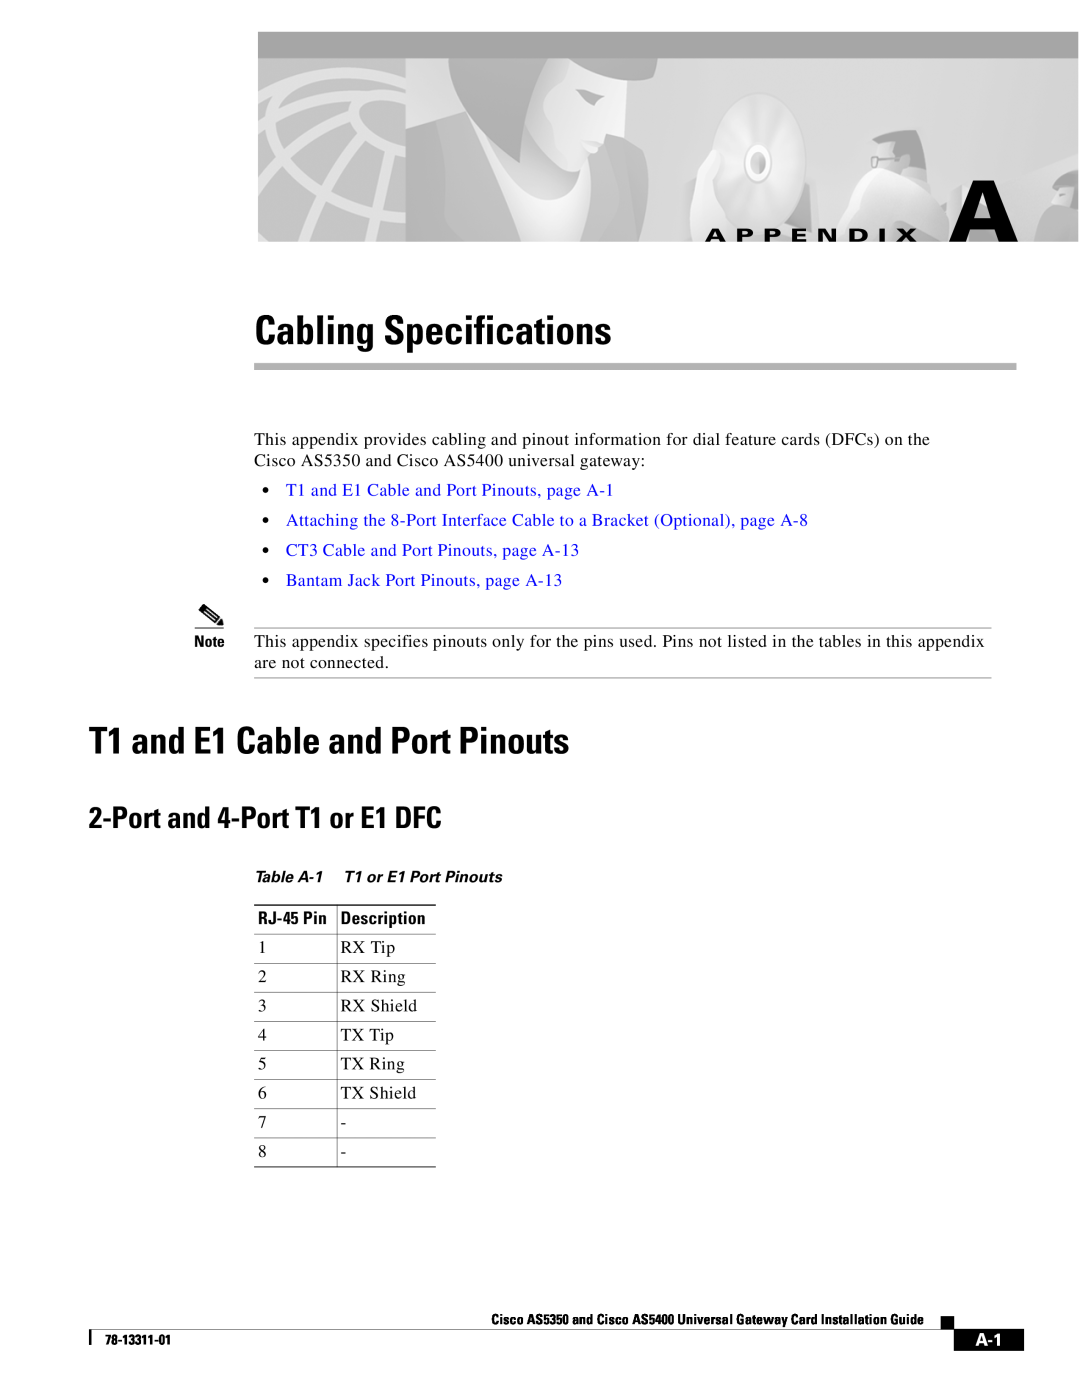 Cisco Systems AS5400 Cabling Specifications, T1 and E1 Cable and Port Pinouts, Port and 4-Port T1 or E1 DFC, RJ-45 Pin 